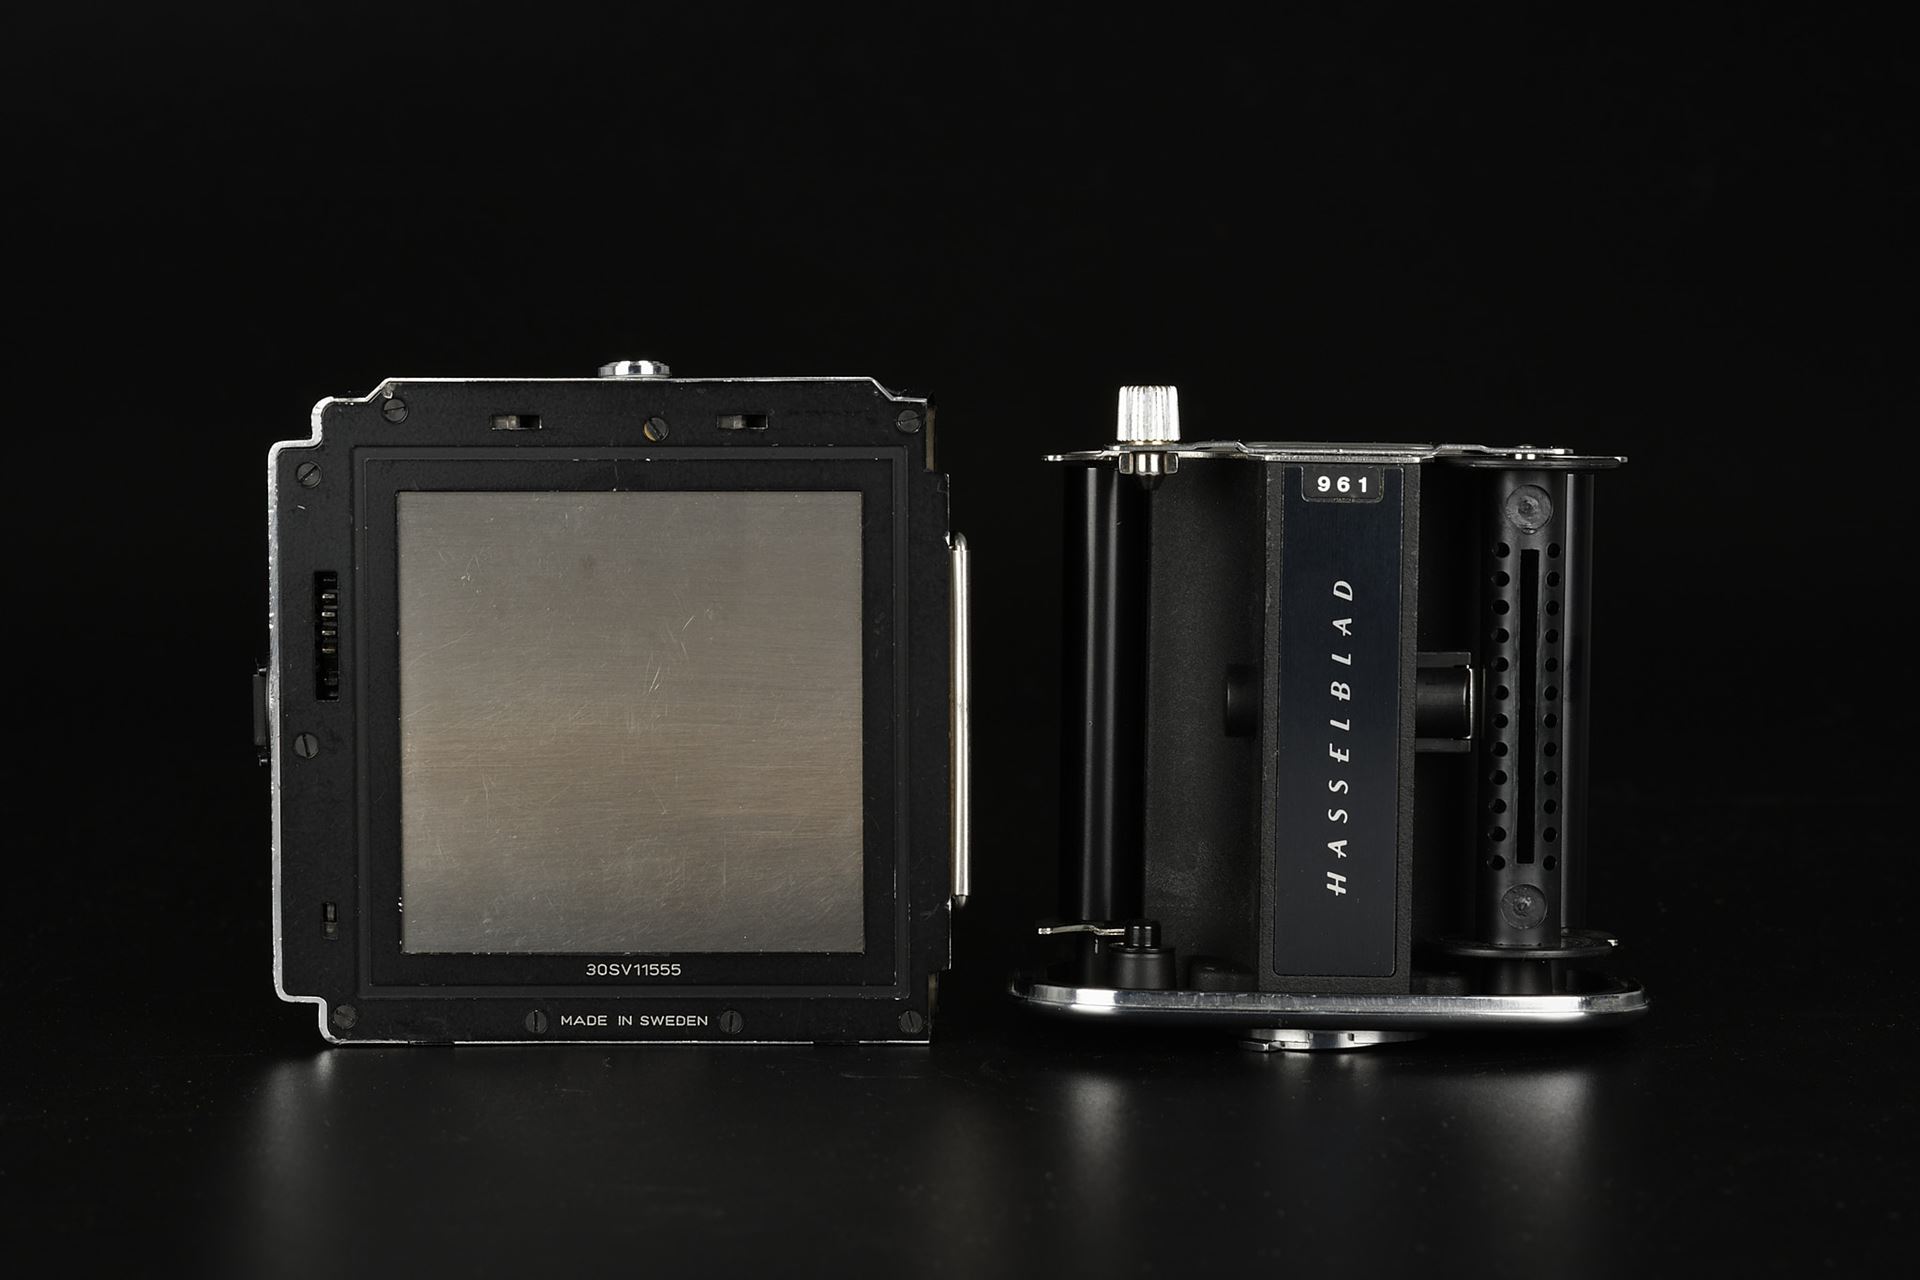 Picture of hasselblad 903 swc with a12 magazines